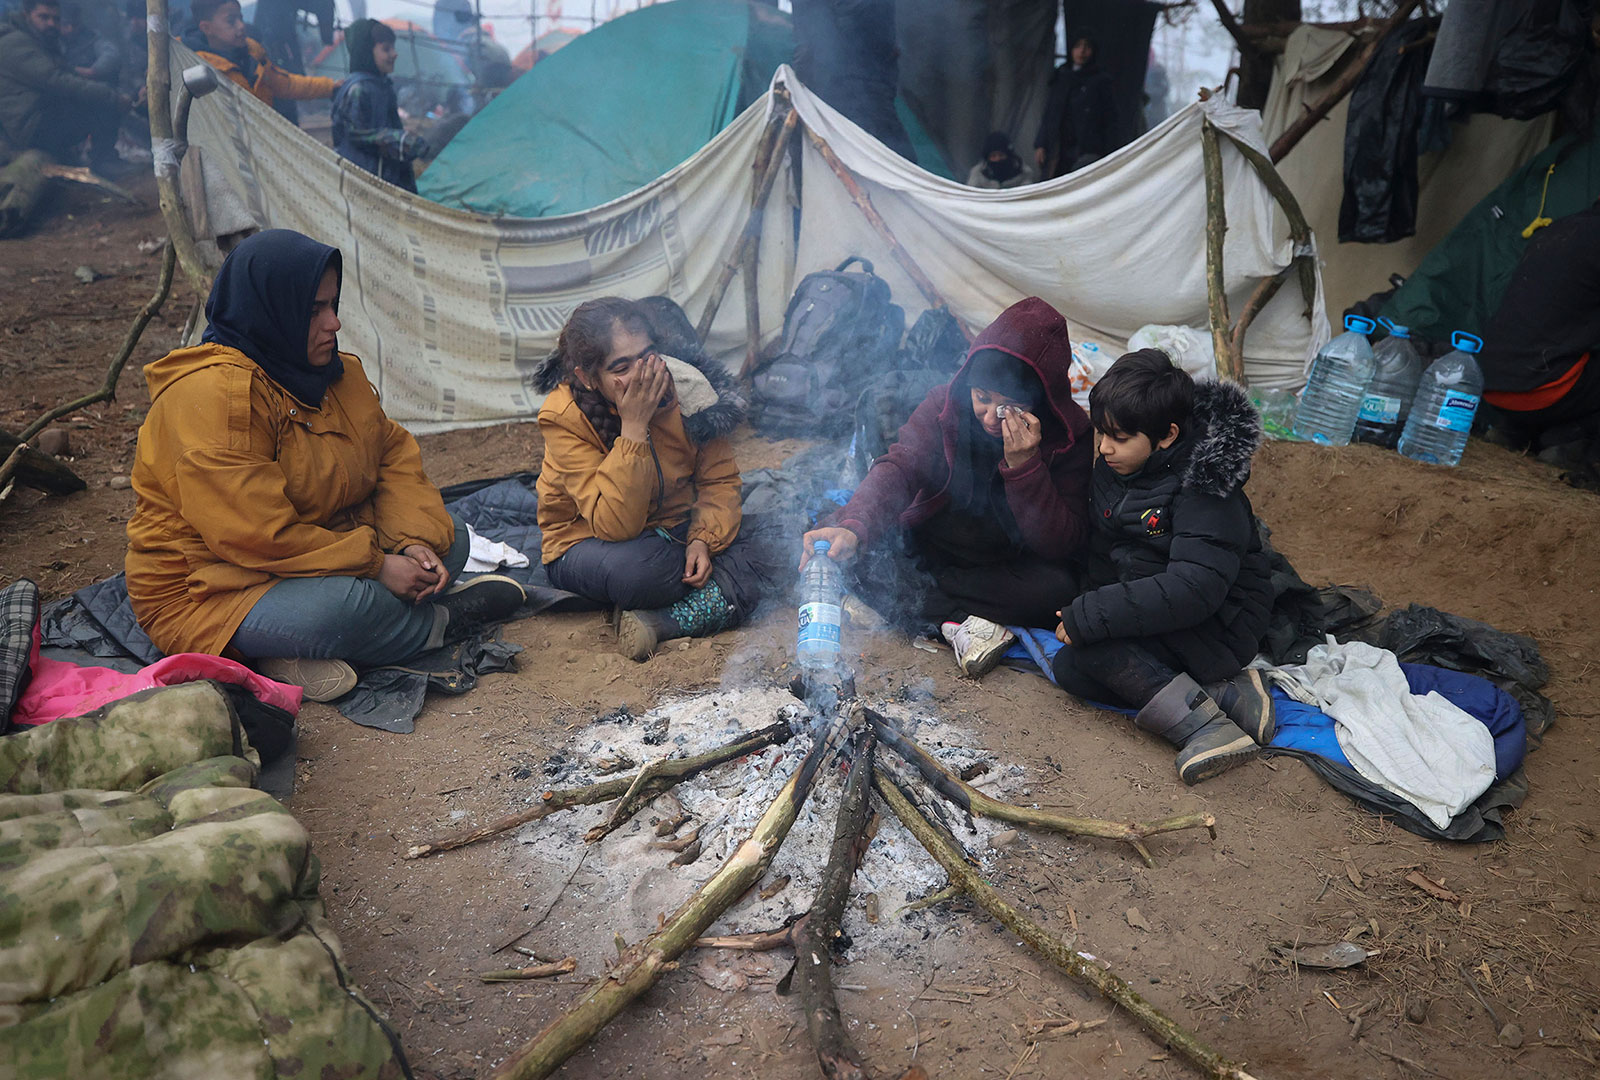 Migrants warm up by a fire at the Poland-Belarus border on Thursday, November 11.